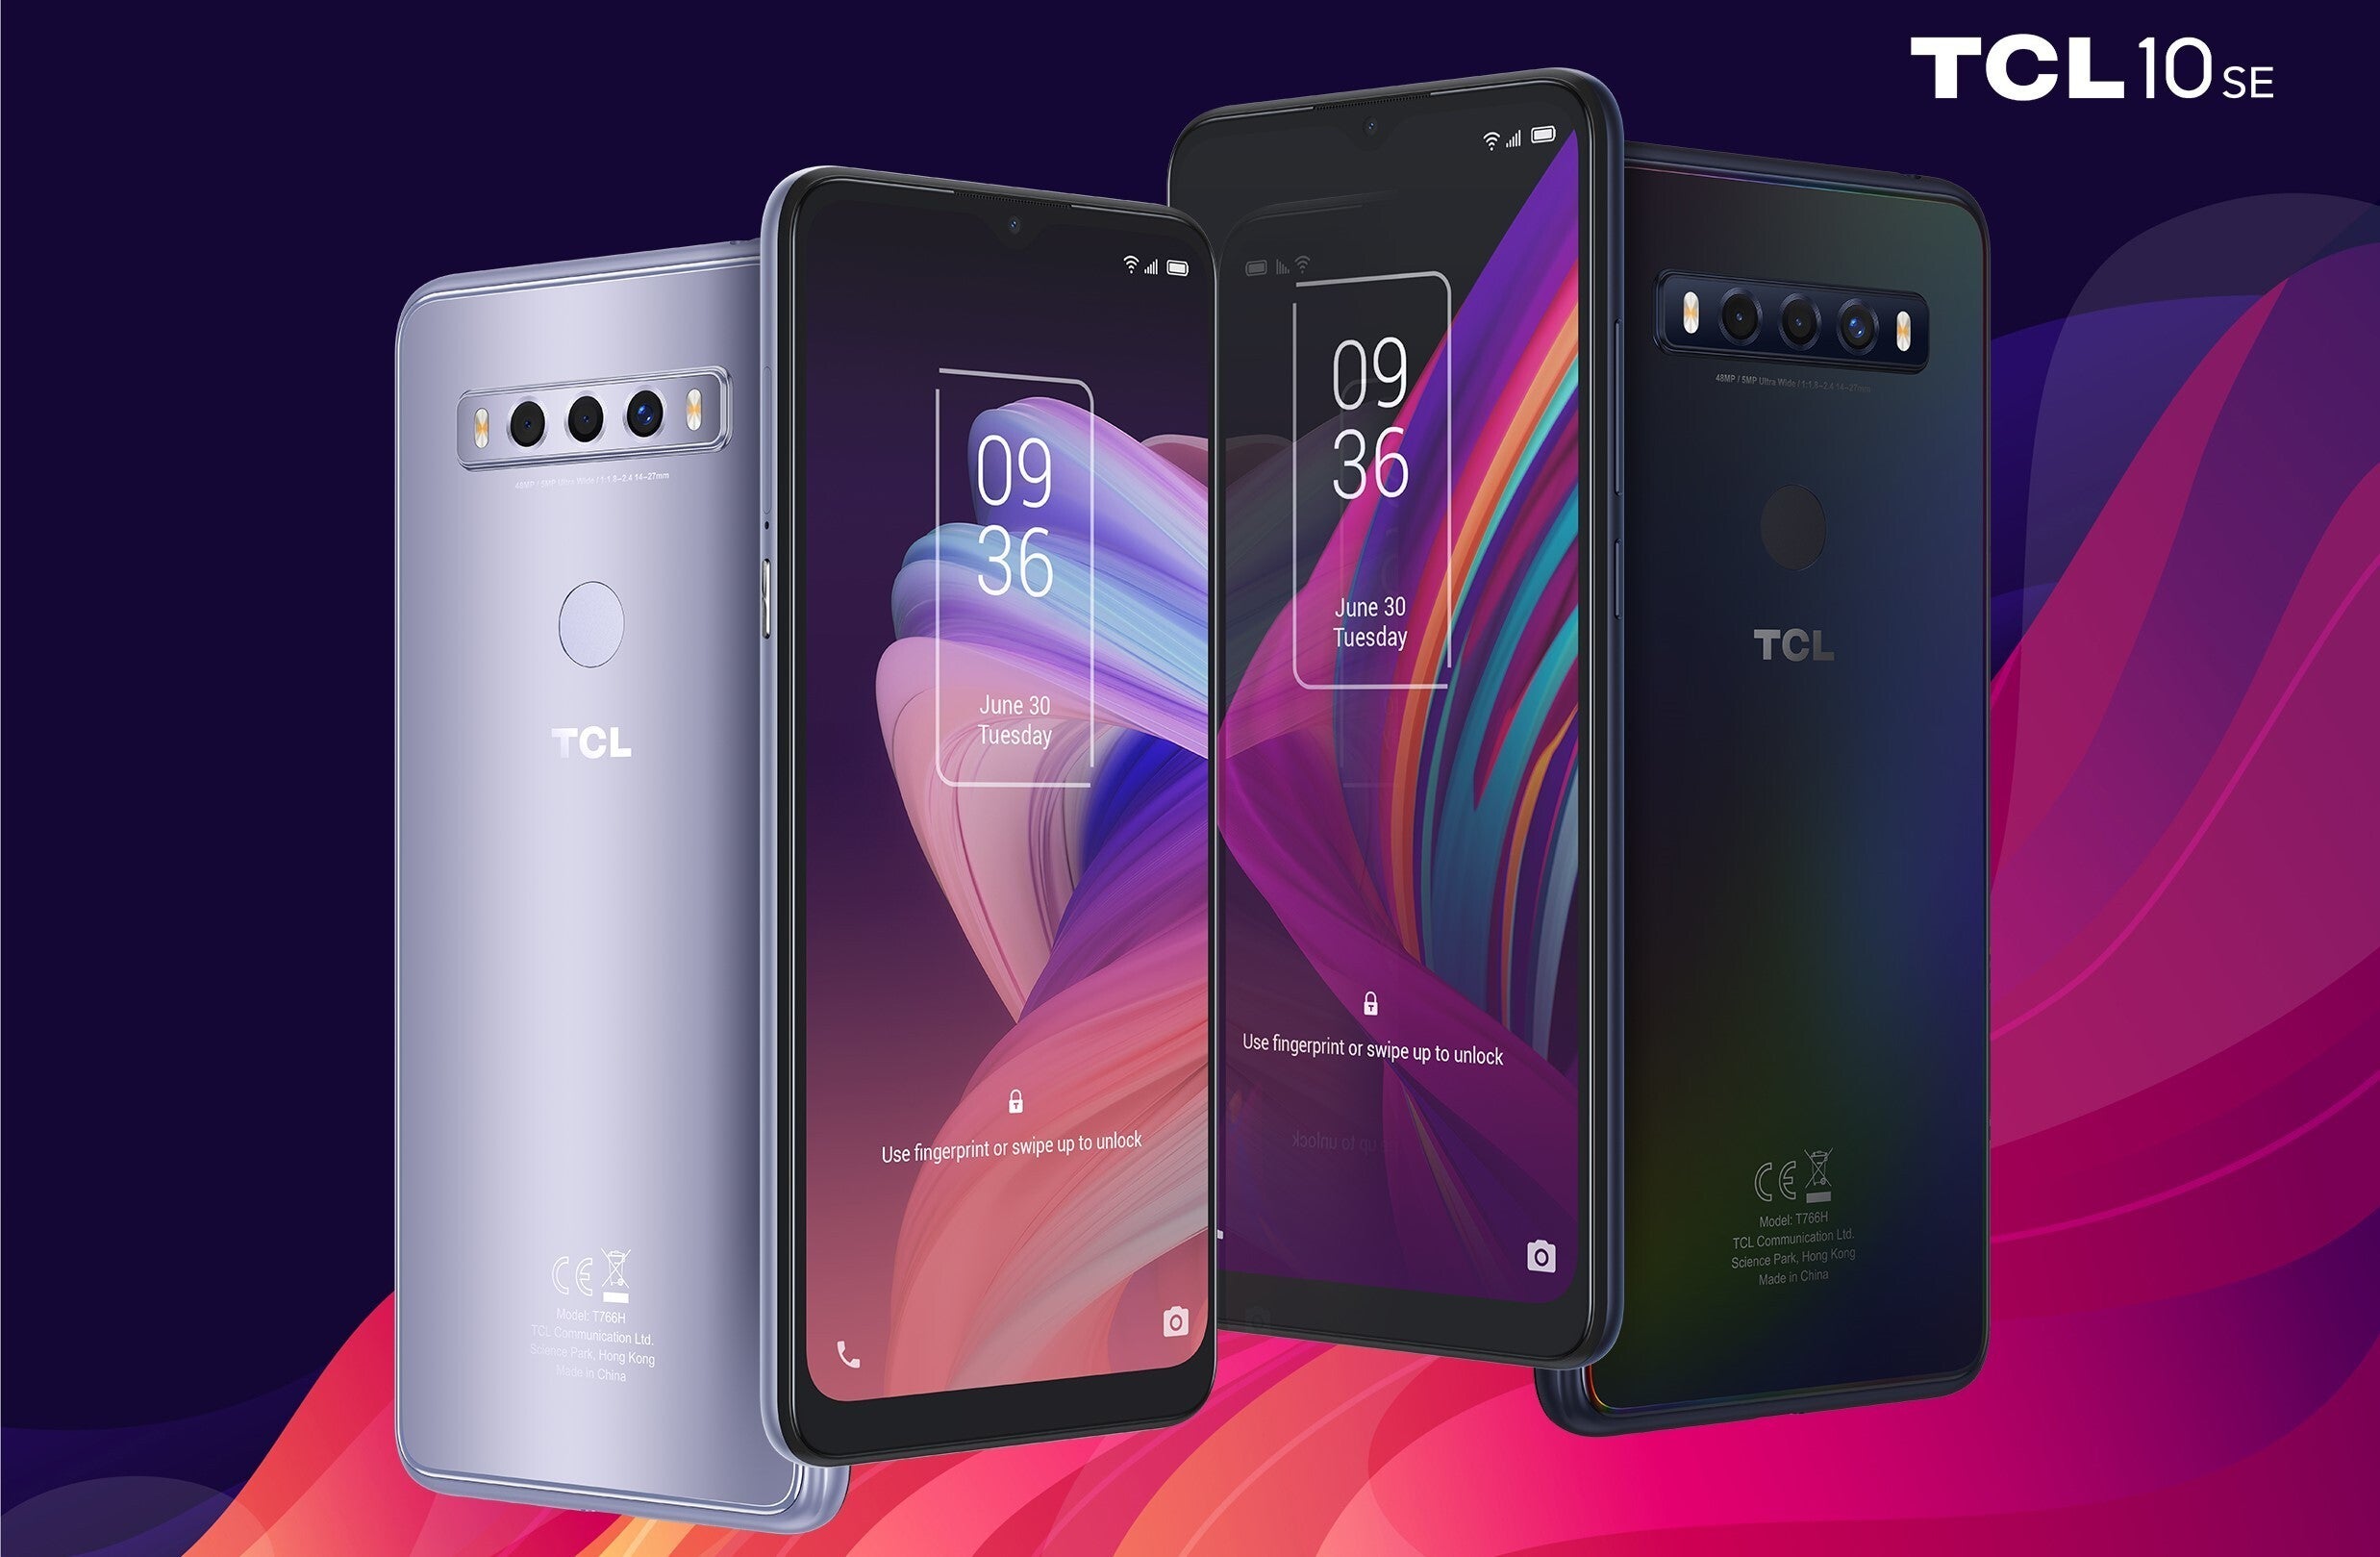 The cheapest model in the updated TCL 10 line up is not the one with the most inferior specs